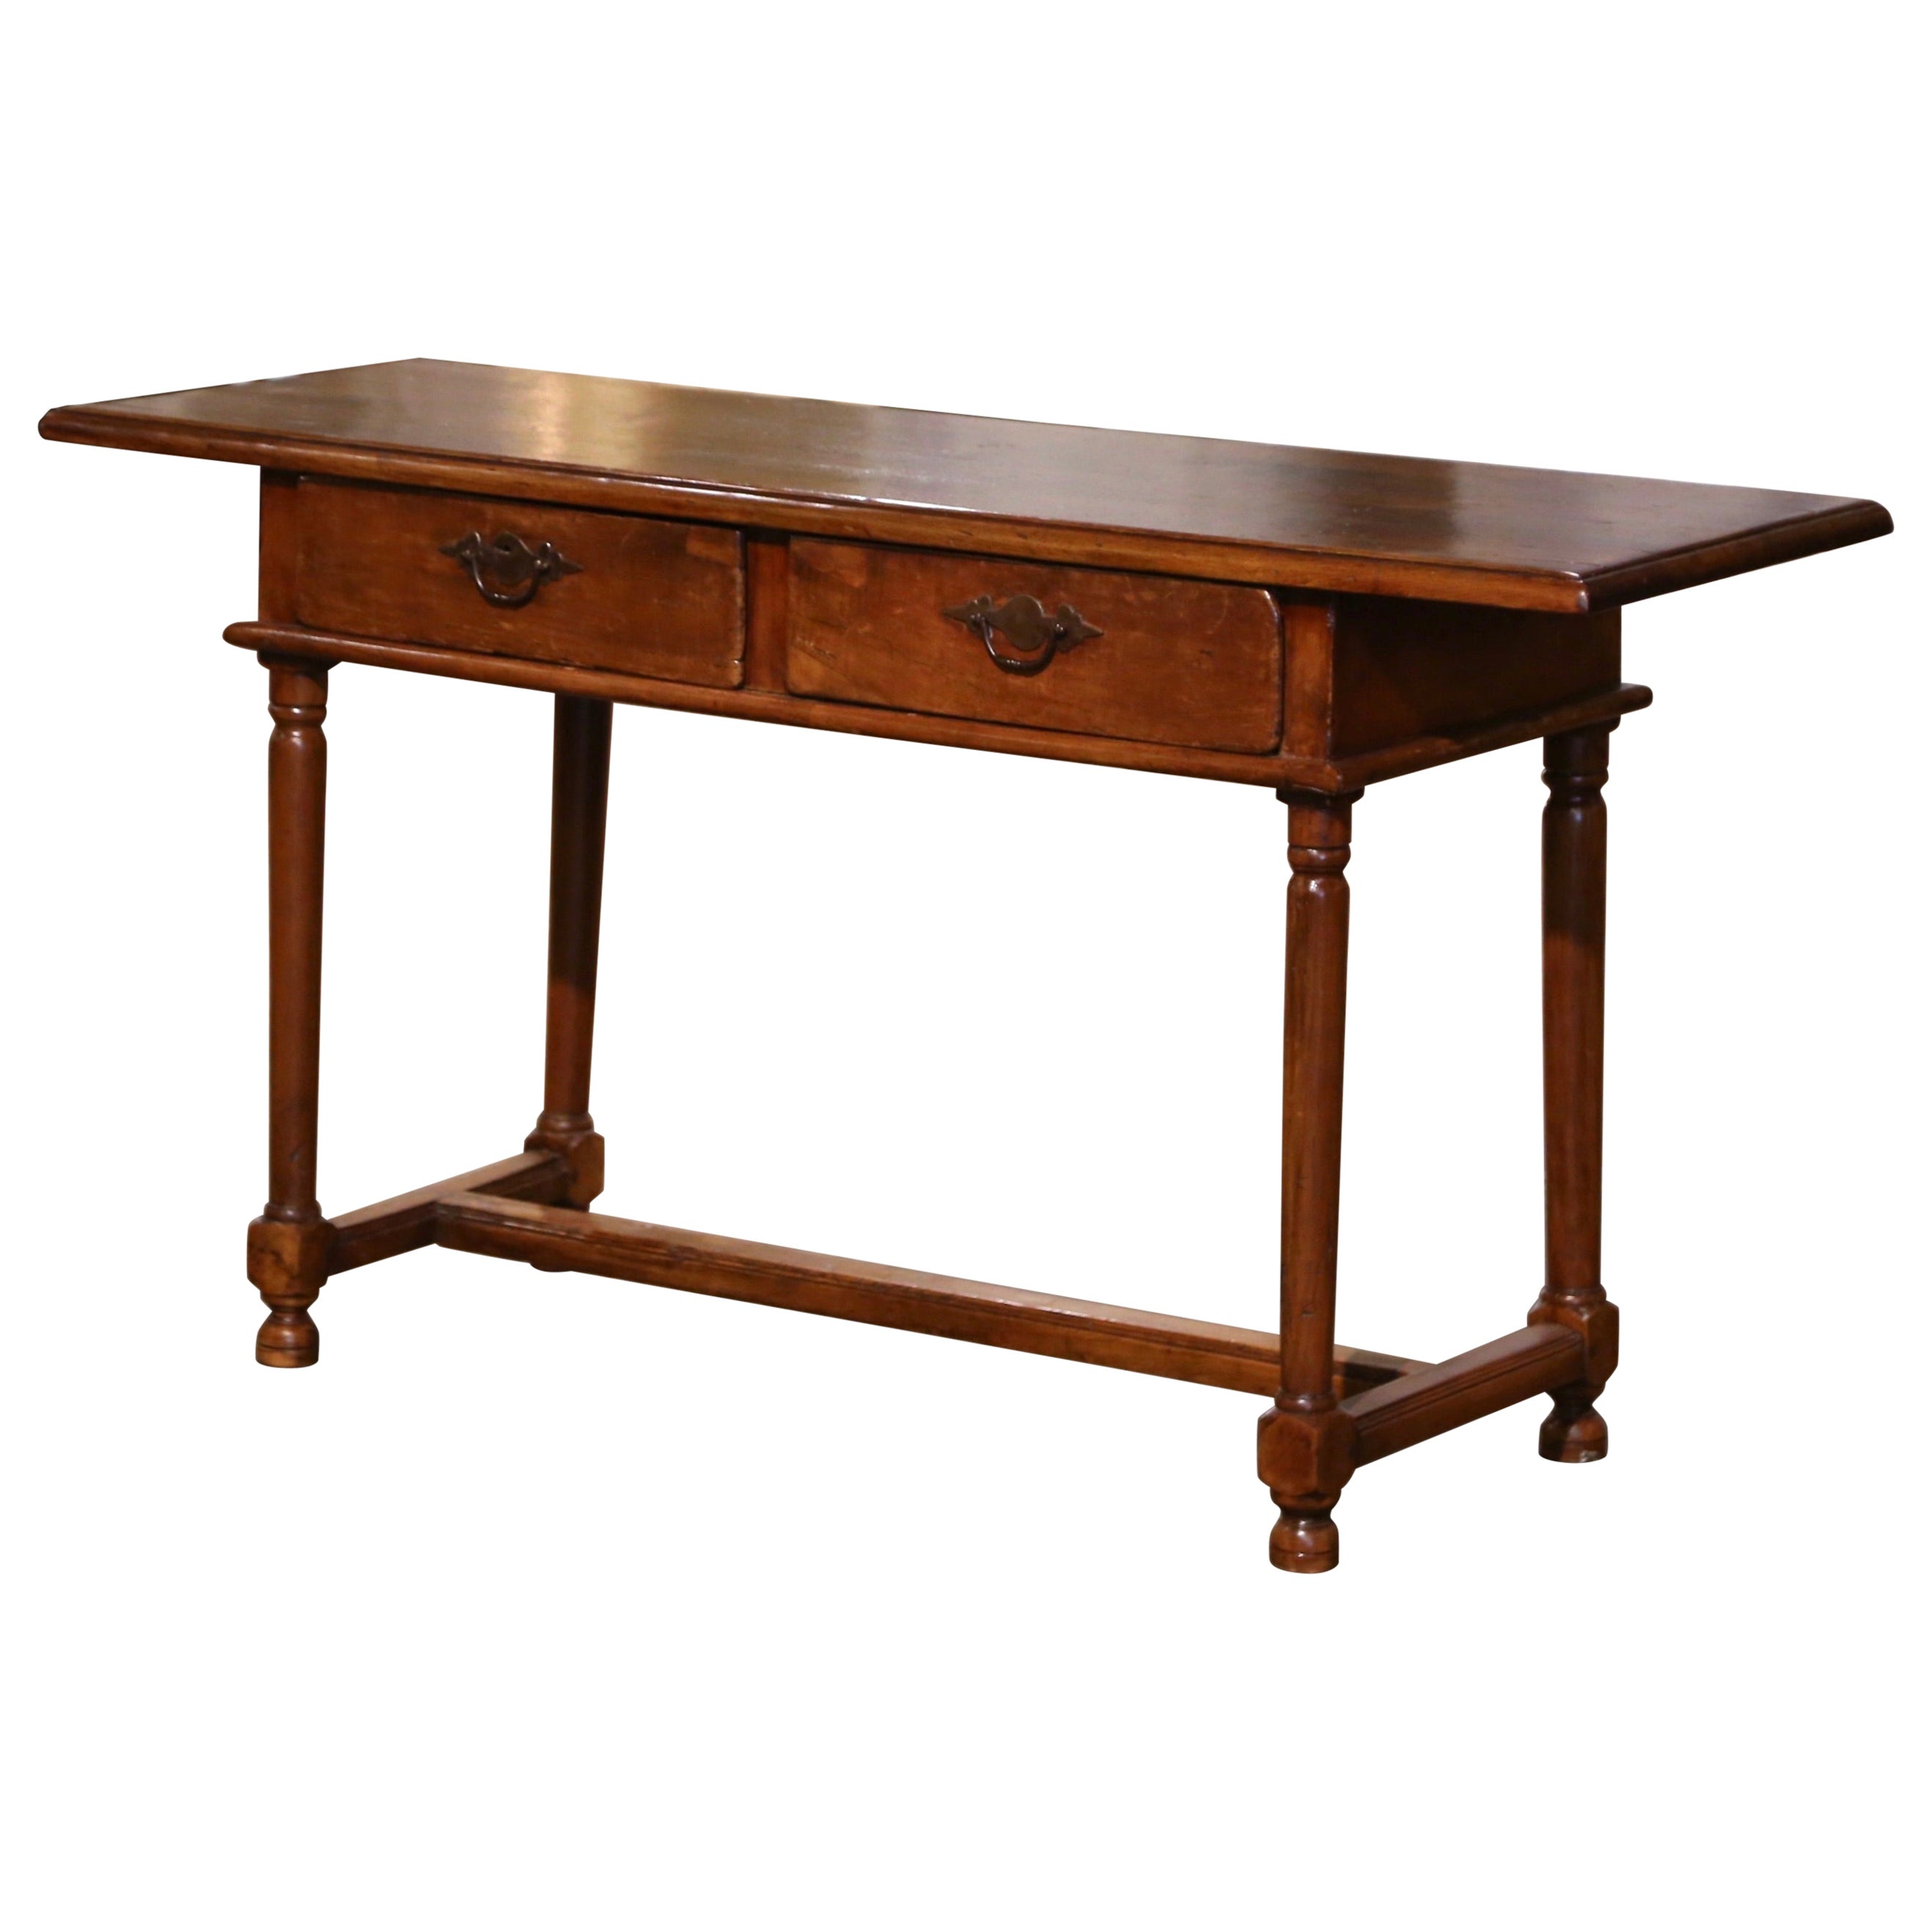 Mid-19th Century French Empire Walnut Console Table with Drawers